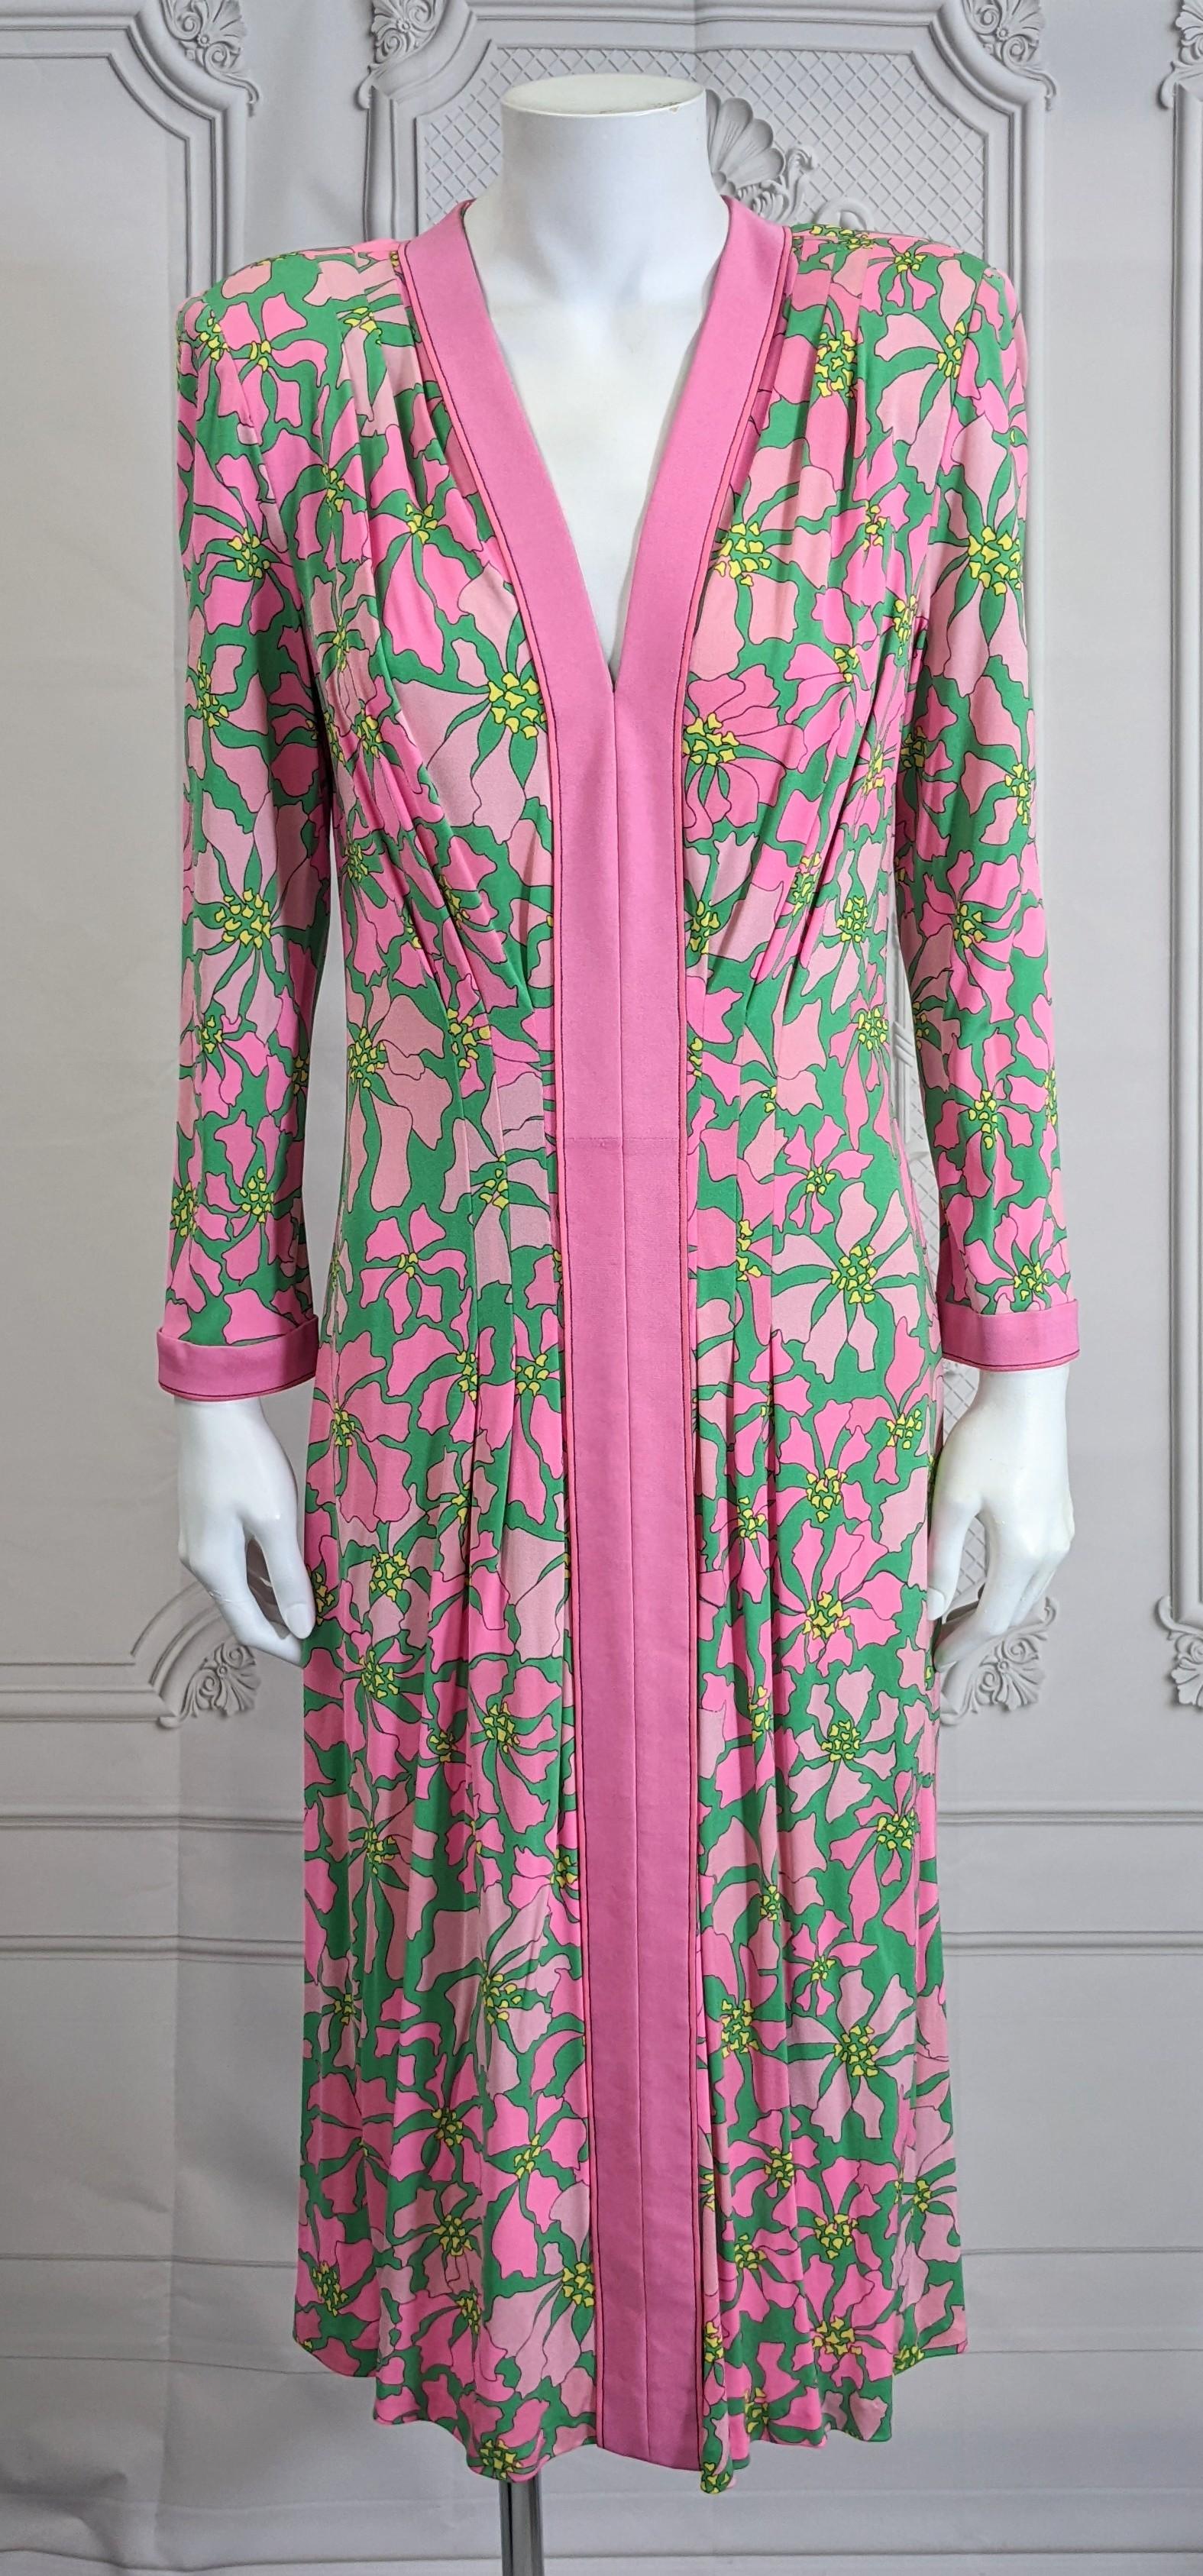 Bessi Silk Jersey Poinsettia Print Dress In Good Condition For Sale In New York, NY